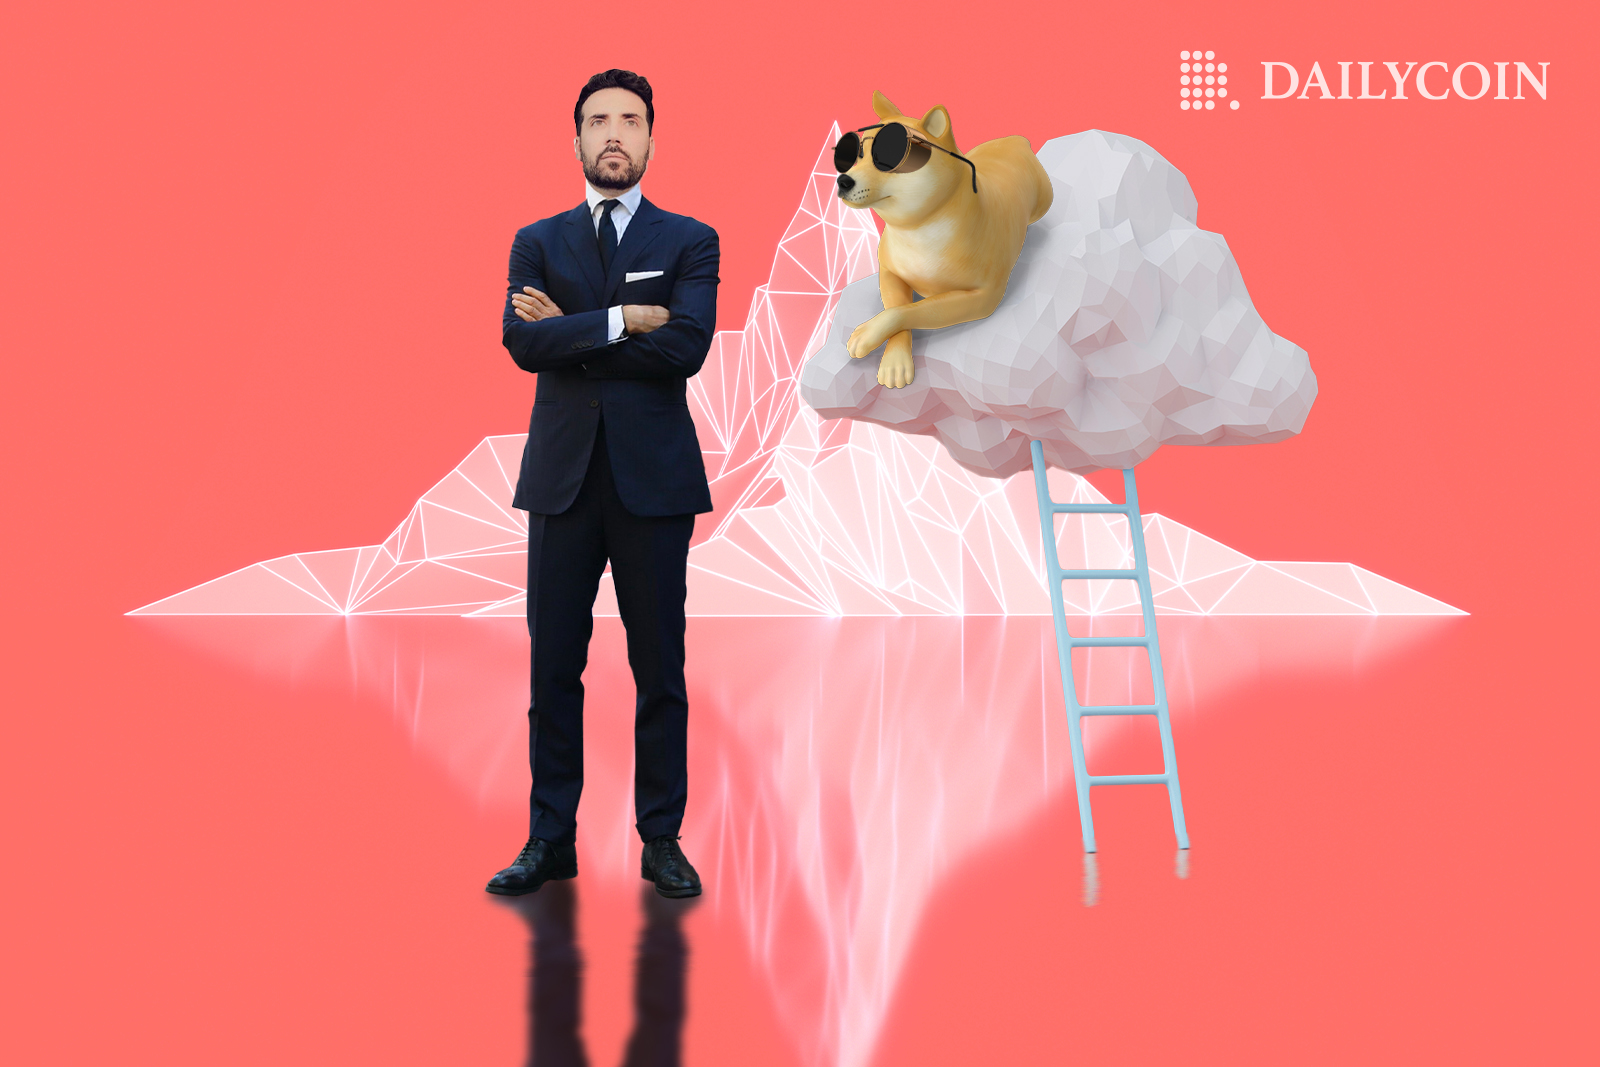 David Gokhshtein standing next to a doge sleeping on a cloud.